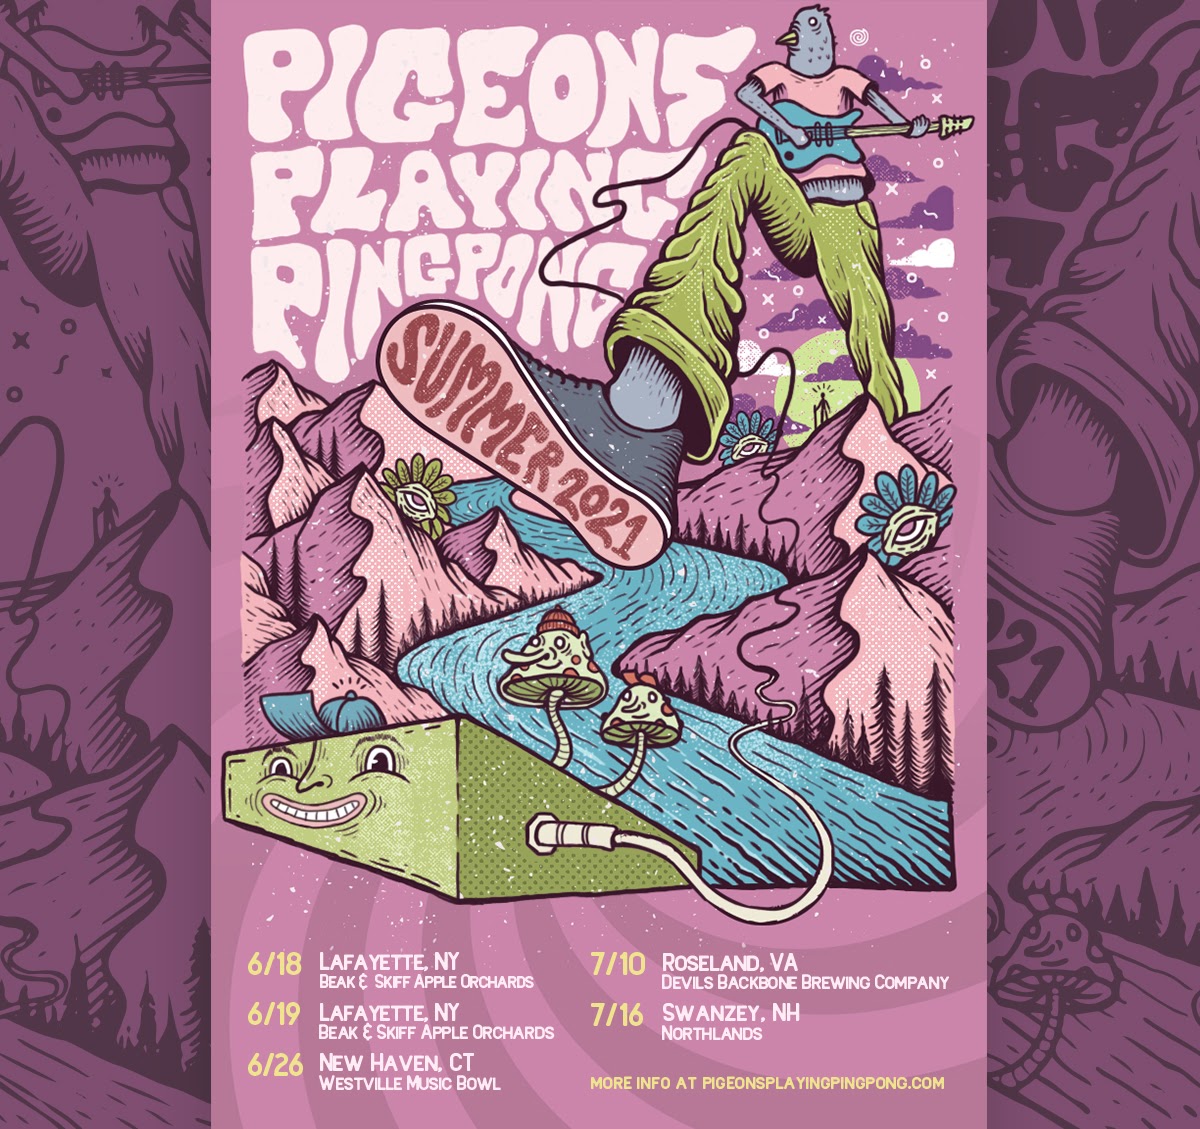 Pigeons Playing Ping Pong Announce Five Summer Dates, Starting in ...